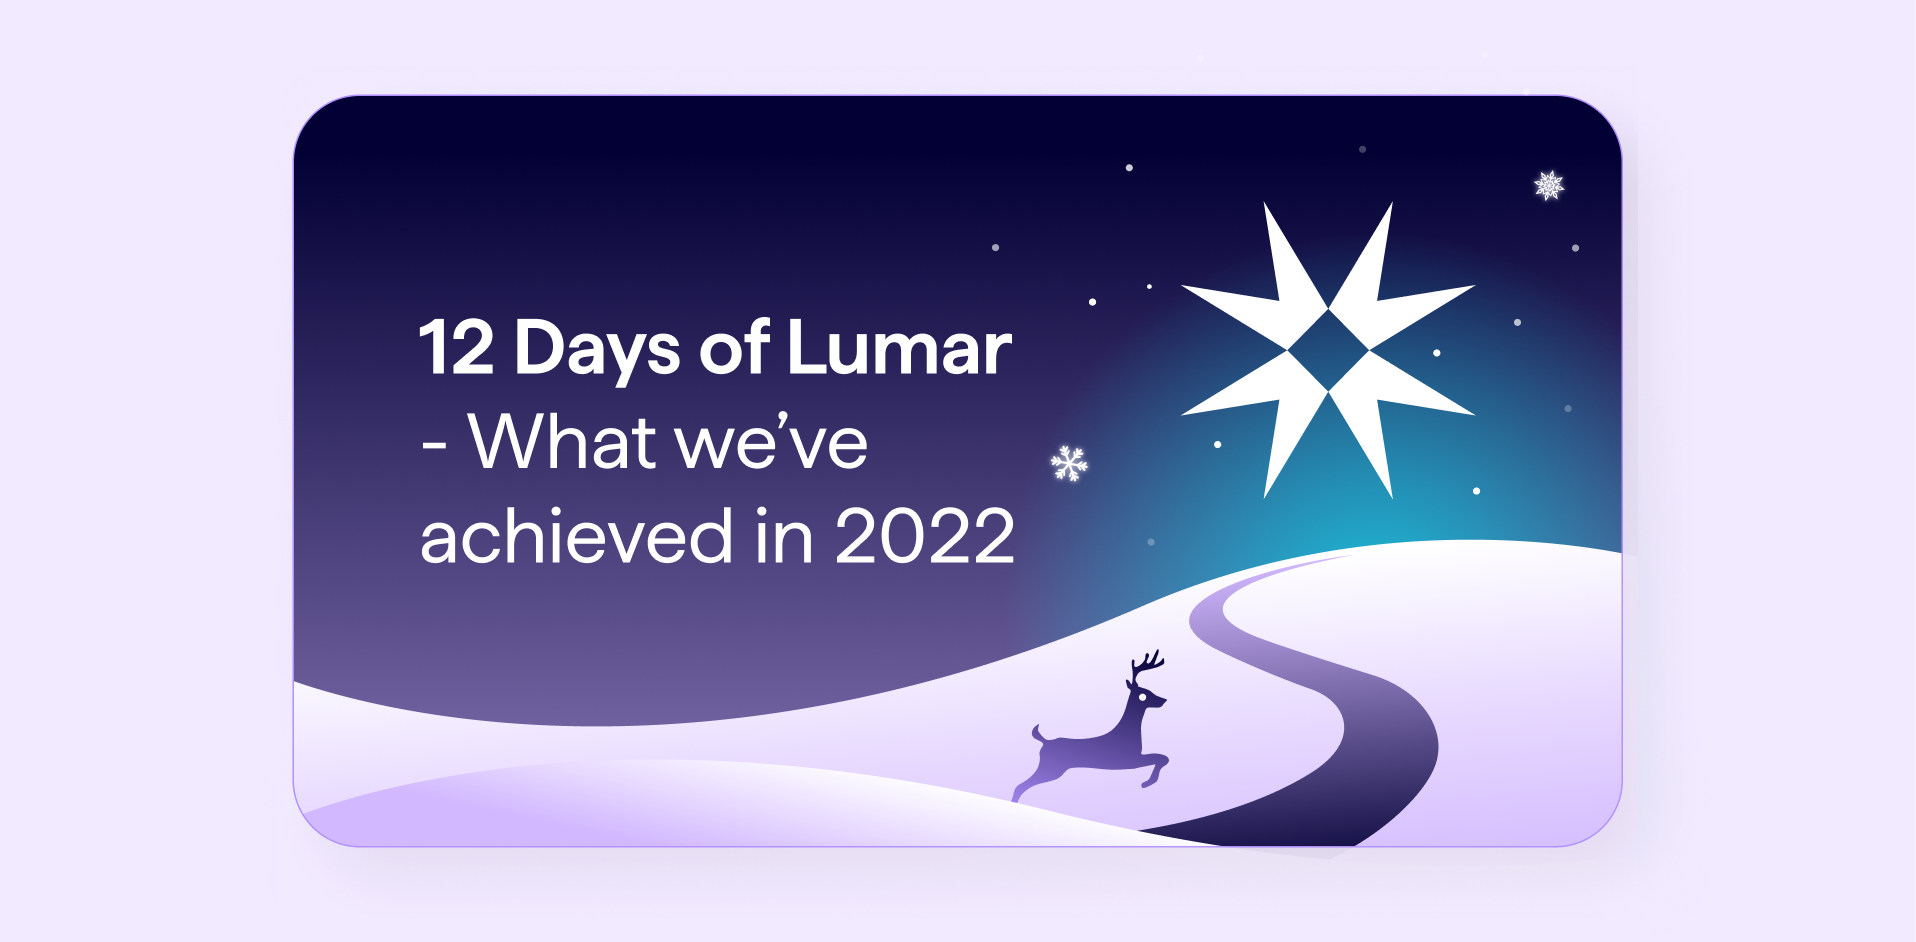 12 Days of Lumar - What we've achieved in 2022